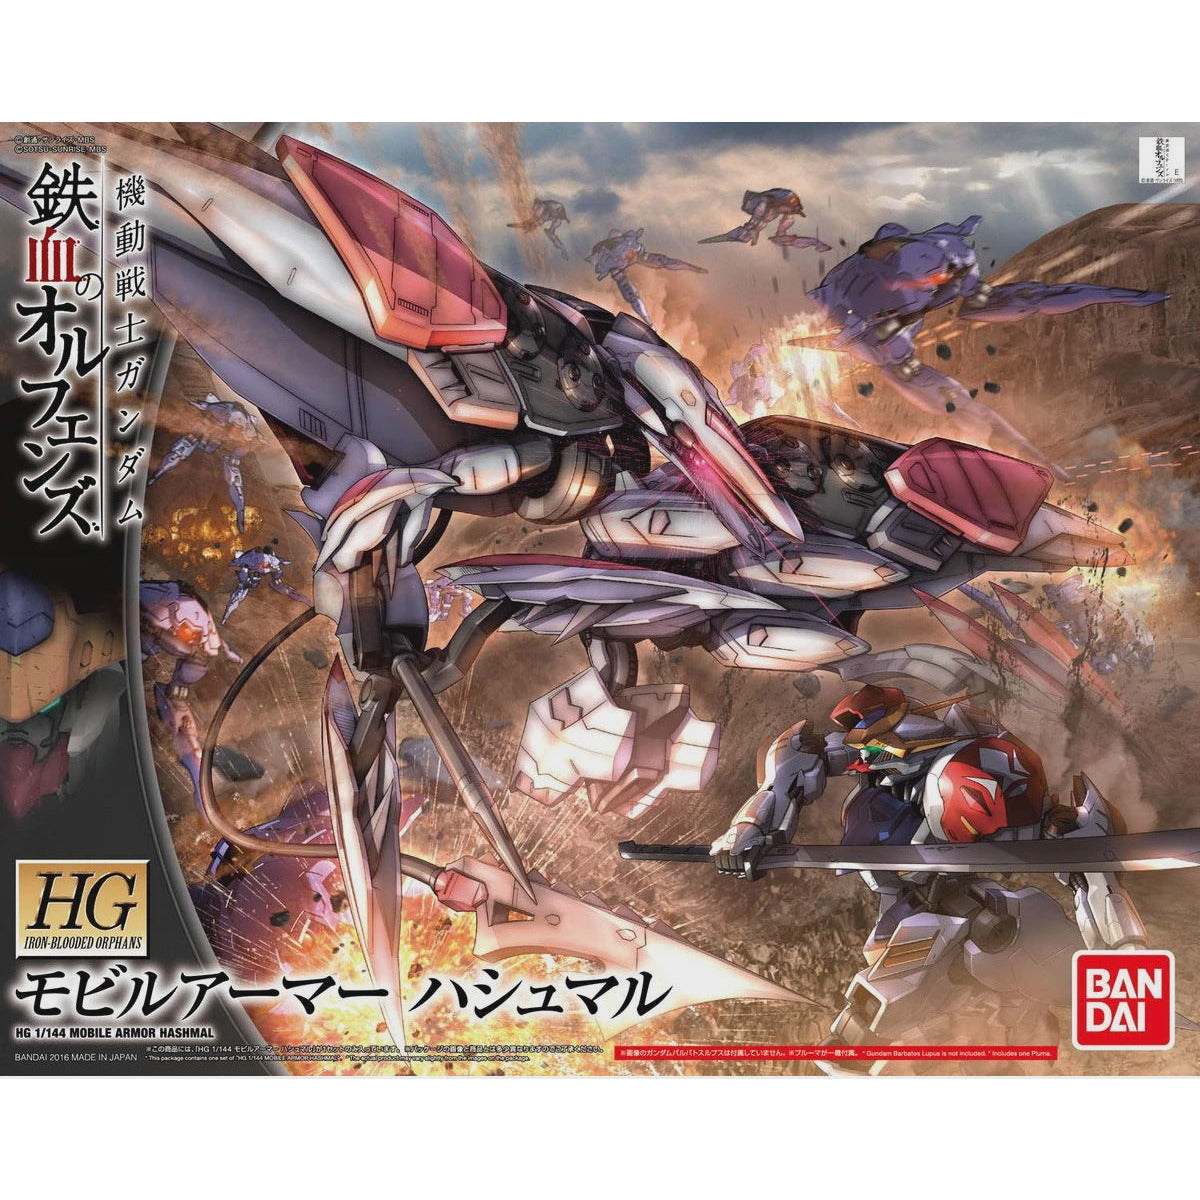 HG 1/144 Iron-Blooded Orphans  #29 Mobile Armor Hashmal #5063836 by Bandai